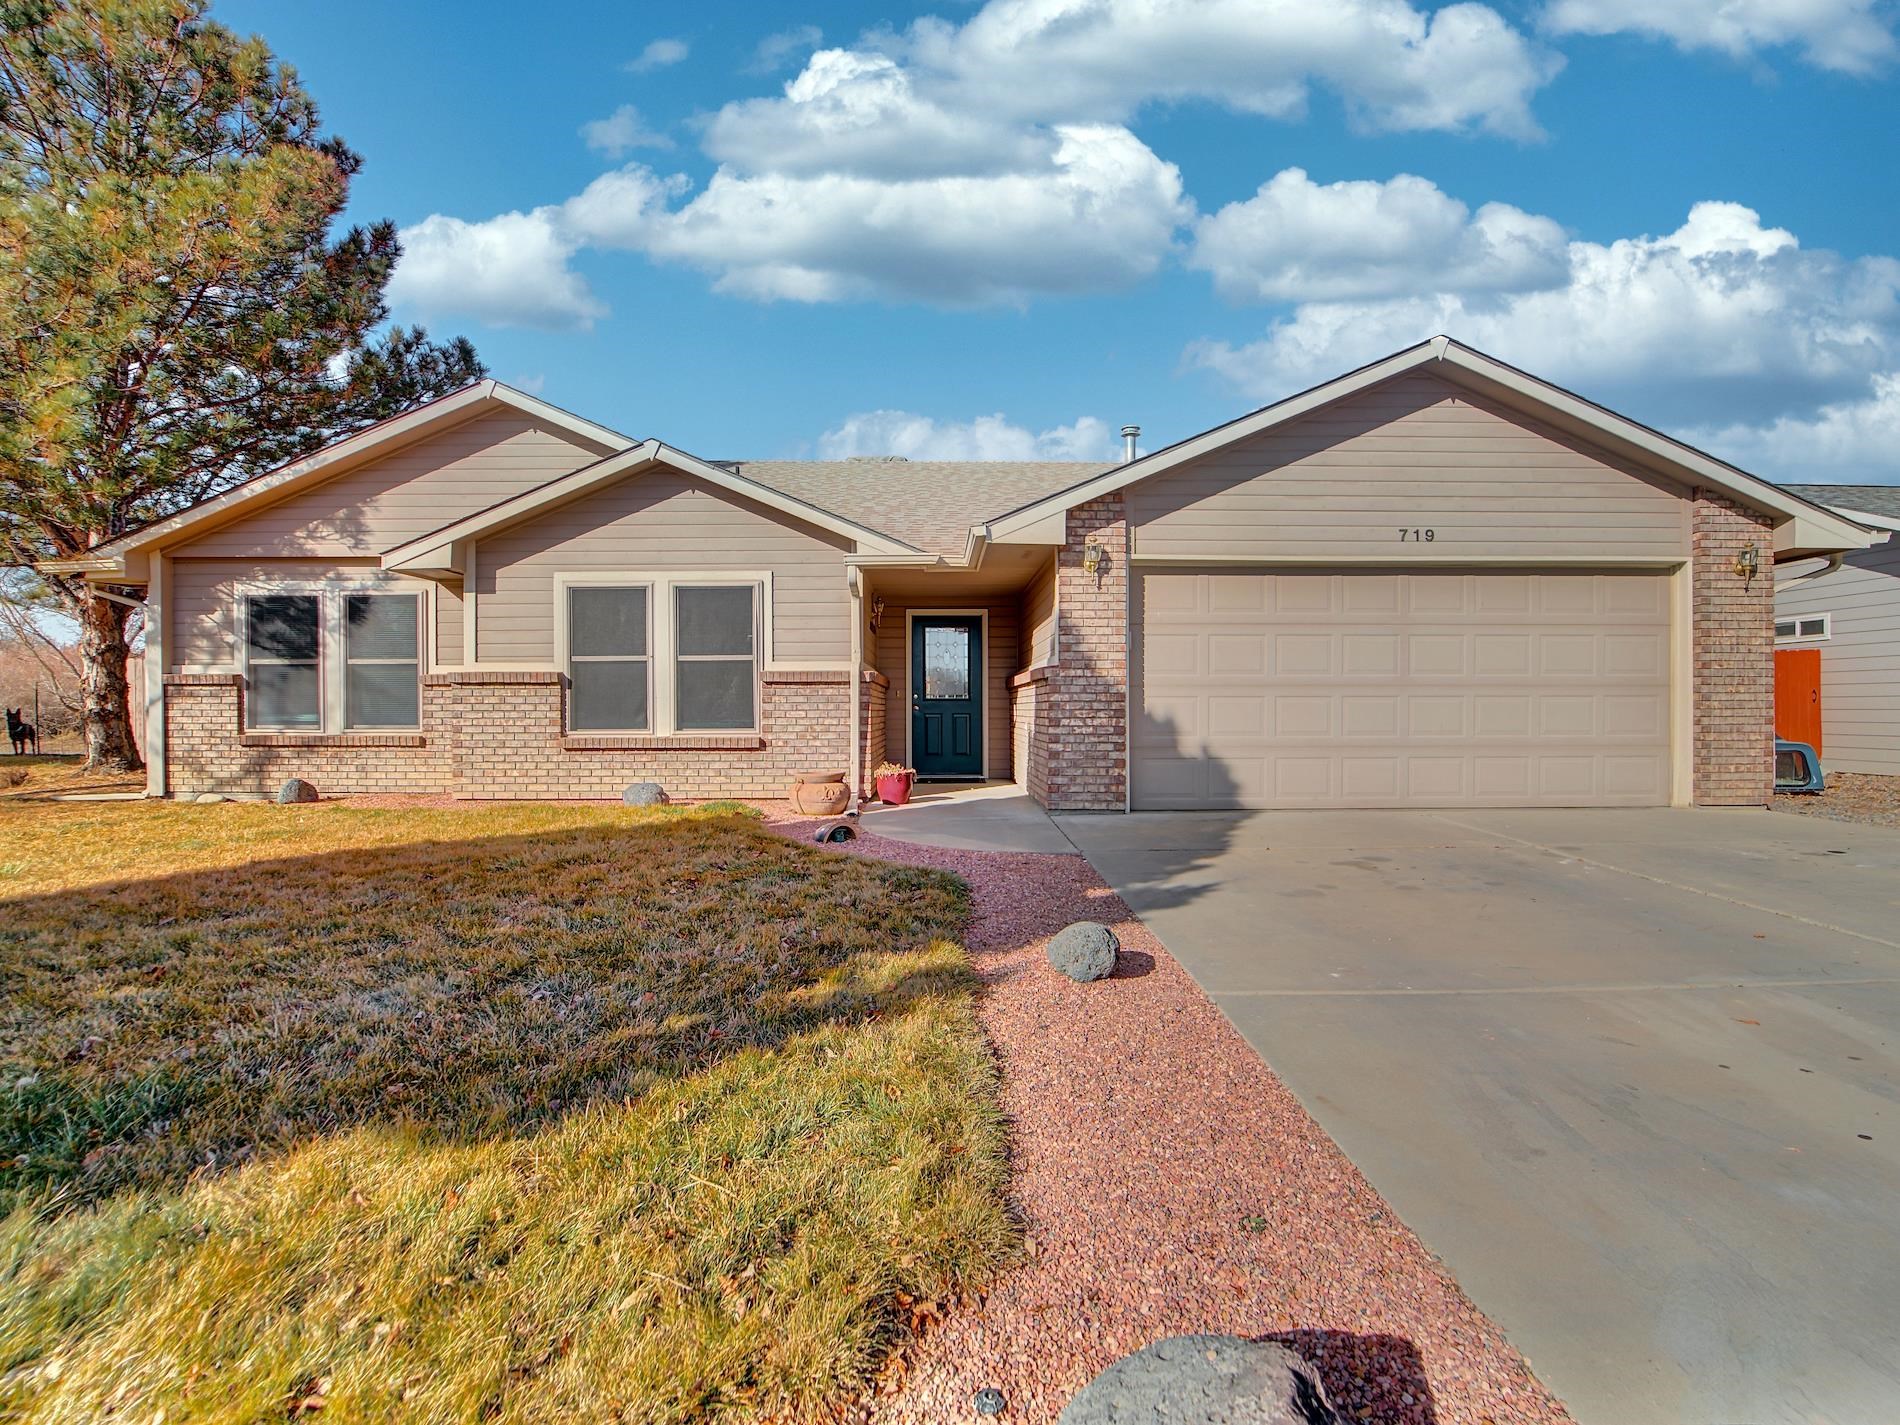 Imagine waking up every day to breathtaking views of the Colorado National Monument. This single-story home in North Grand Junction offers just that, along with all the benefits of single level living. Whether you're relaxing on the back patio or cooking dinner in the kitchen, you can enjoy the view right outside your window. This home features a 5-piece master bathroom along with a formal dining room that could be used as a second living area or an office.  Schedule a showing today.